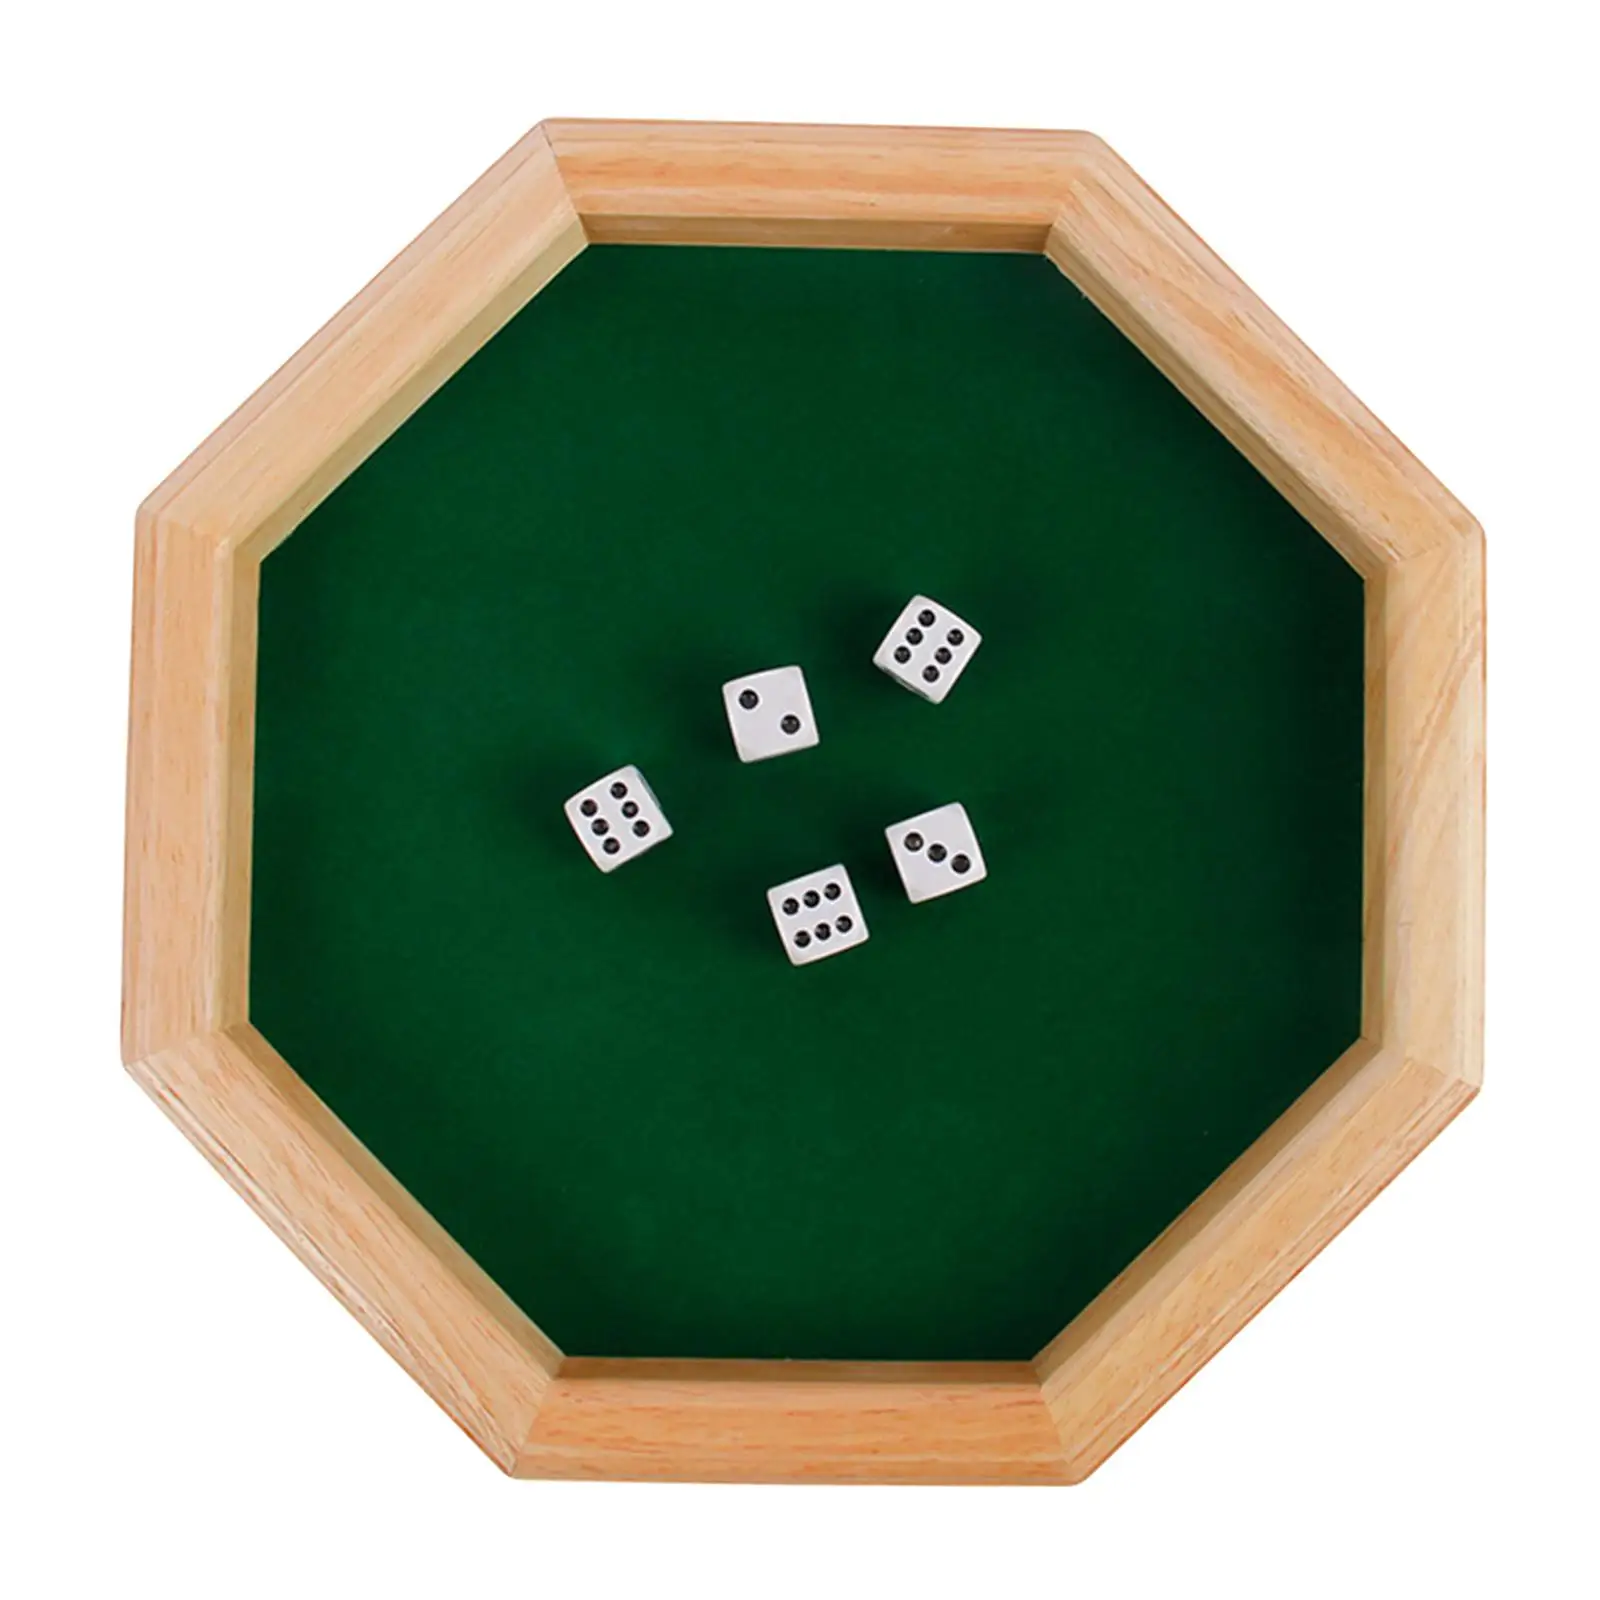 Octagonal Dice Tray Wooden Dice Storage Box Board Game RPG Dice Box Key Wallet